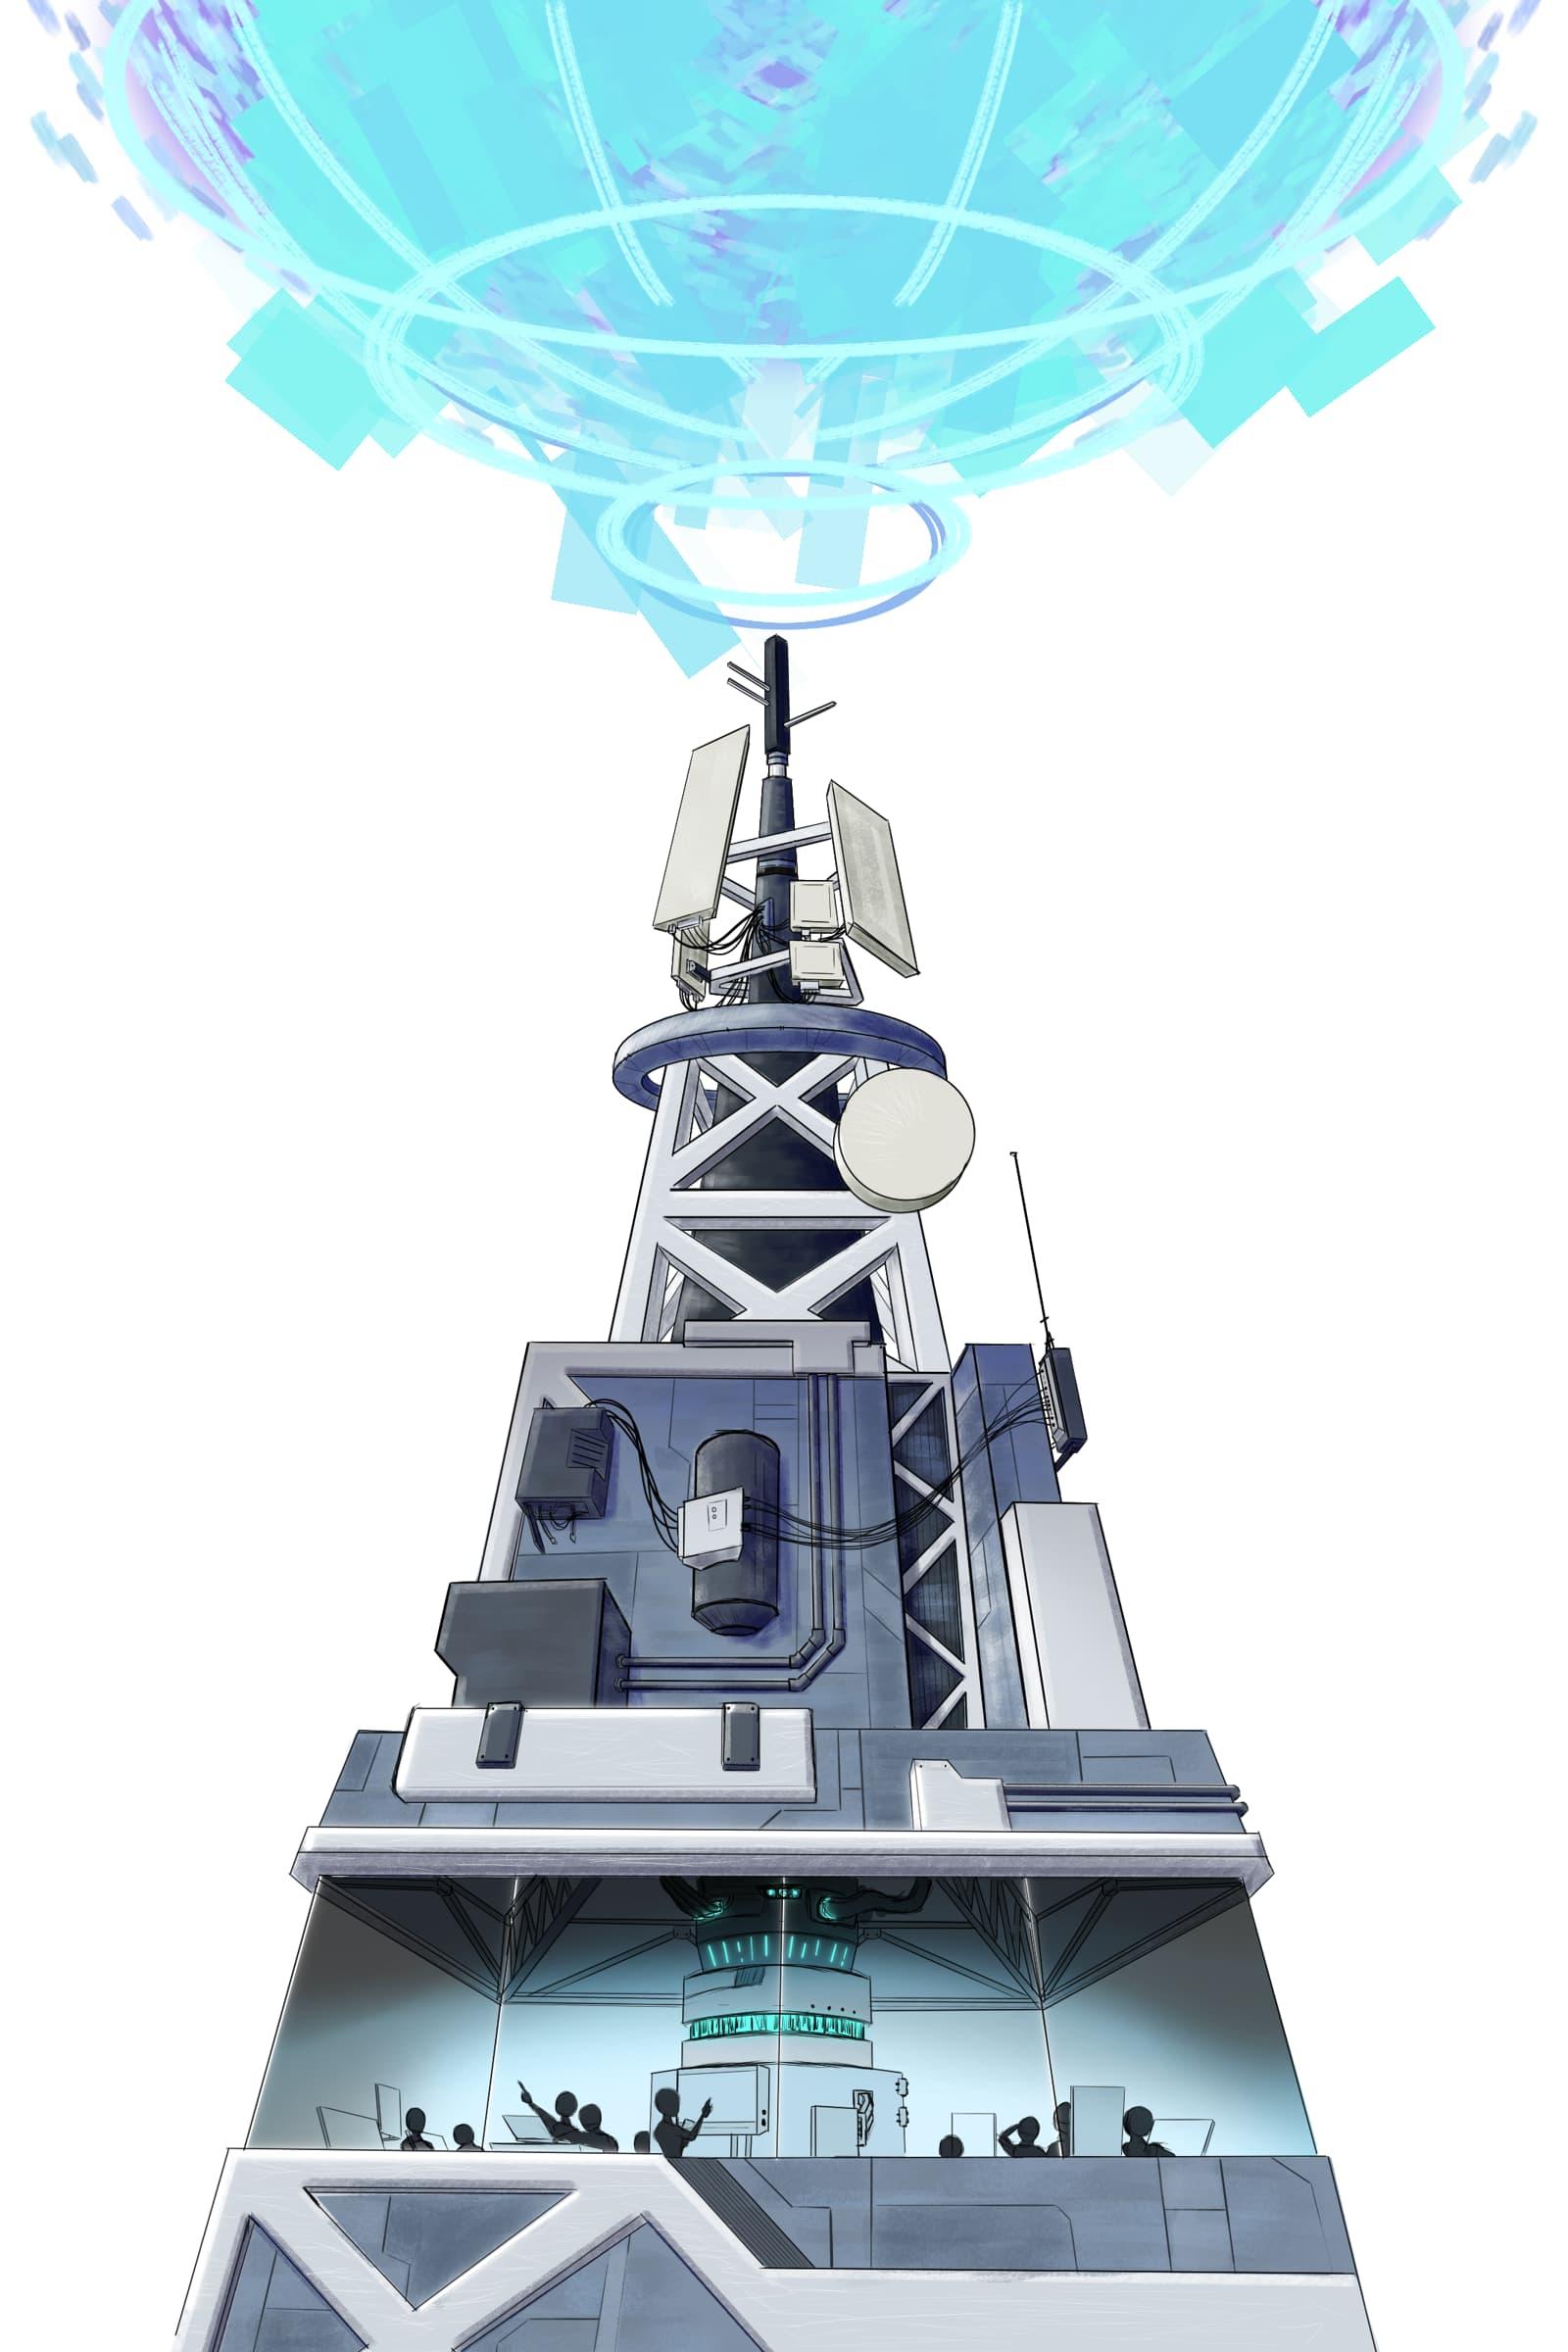 An illustration of a skyscraper broadcast tower, sending a large blue virtual signal into space